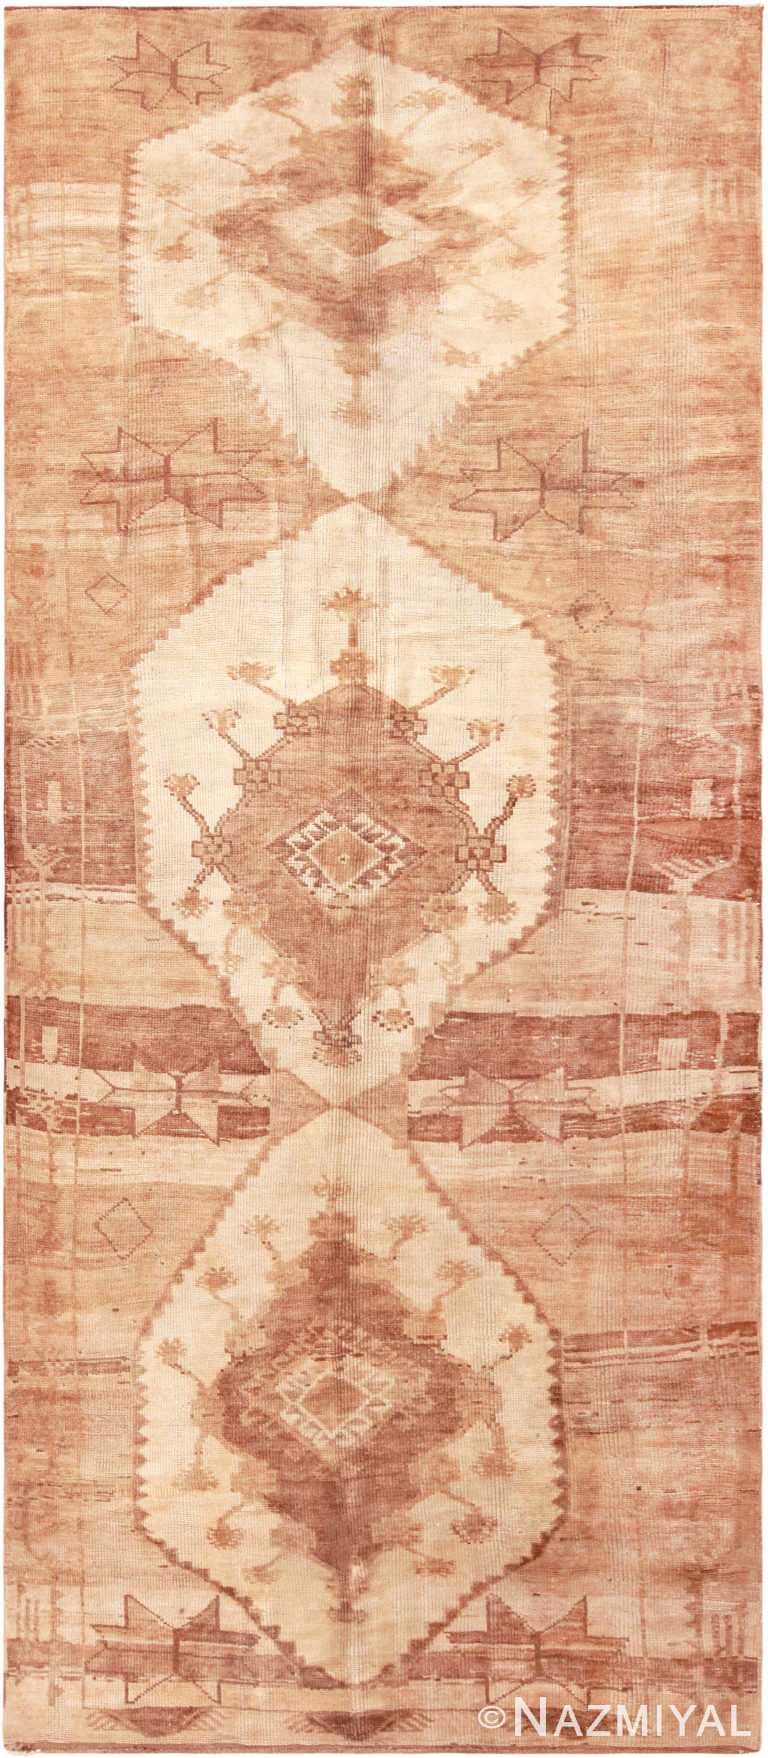 Tribal Long And Narrow Vintage Kars Rug From Turkey 72280 by Nazmiyal Antique Rugs